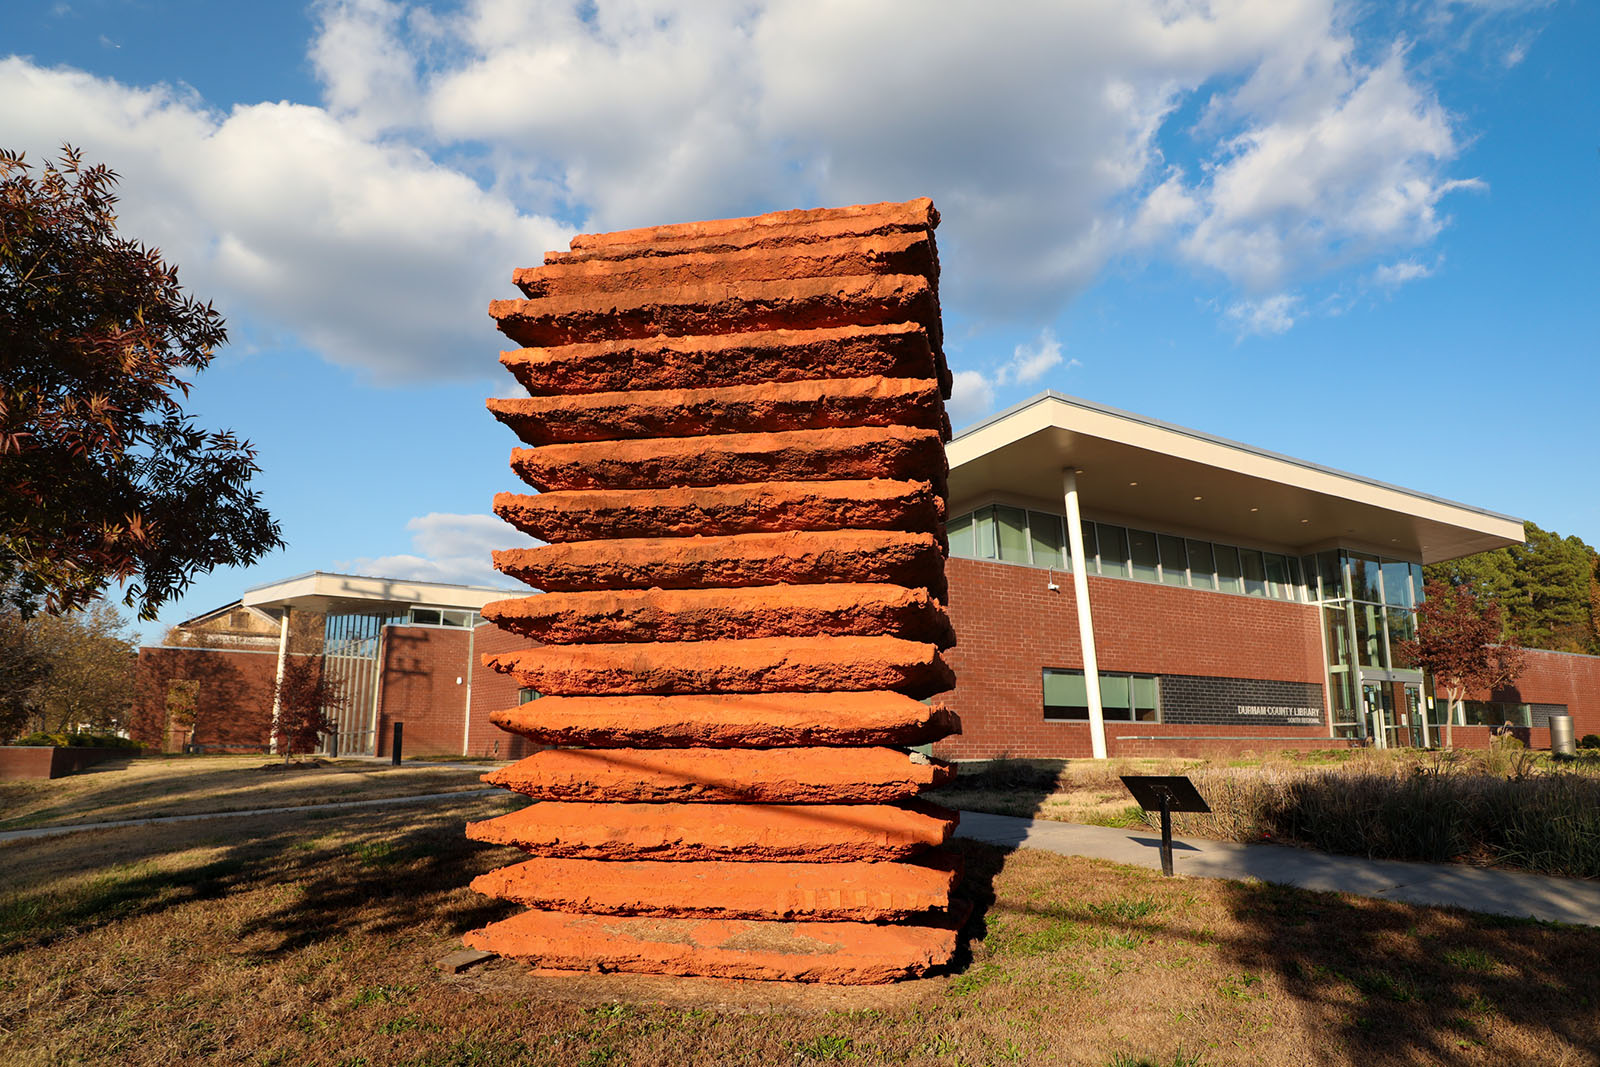 A tall, earth-colored sculpture standing in front of a building